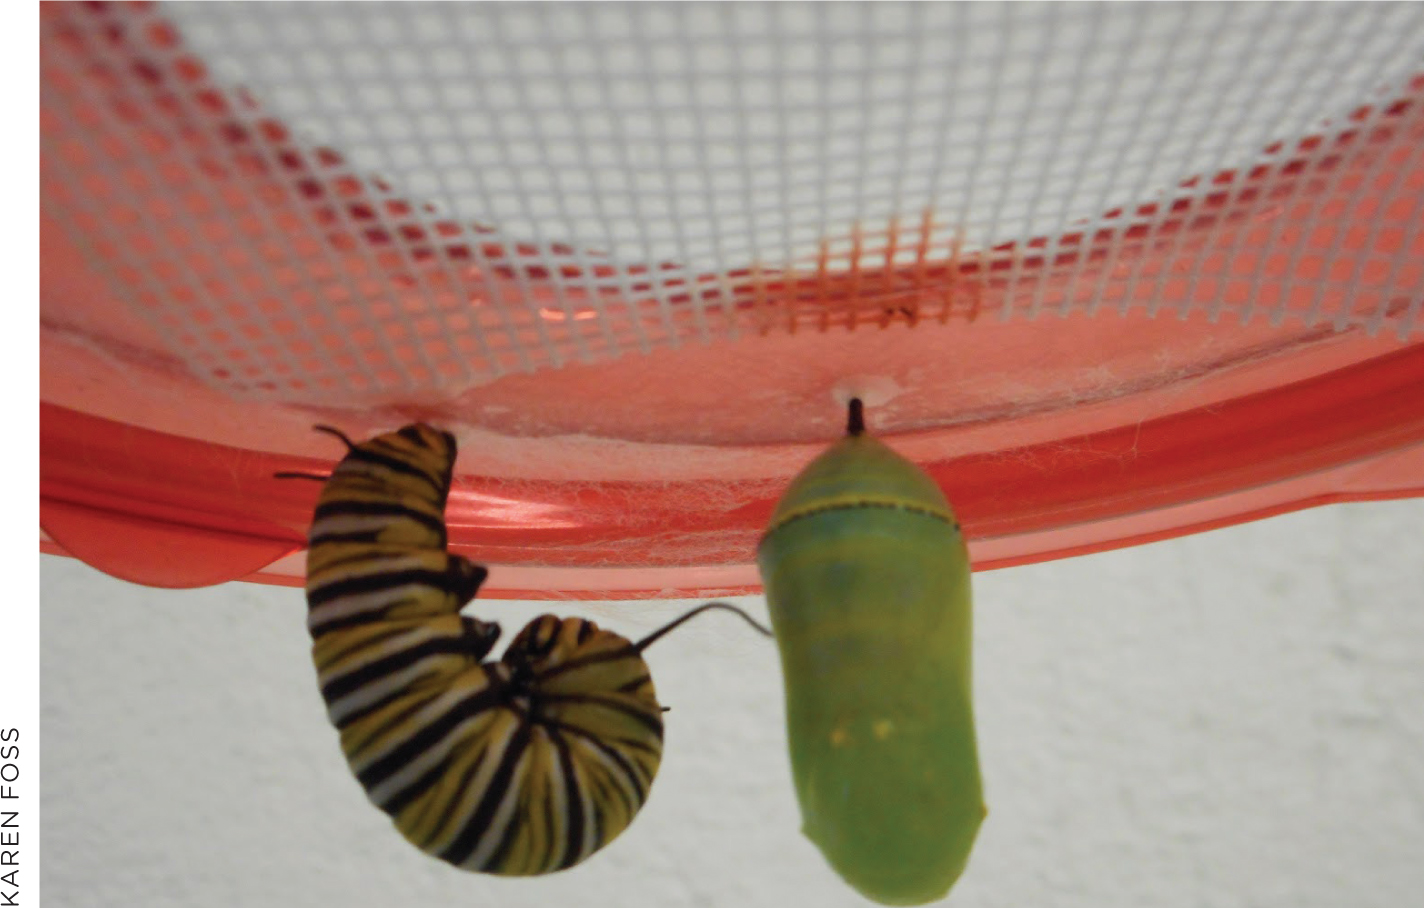 As part of their CS project, students observe metamorphosis in the classroom, first seeing how caterpillars form a chrysalis.